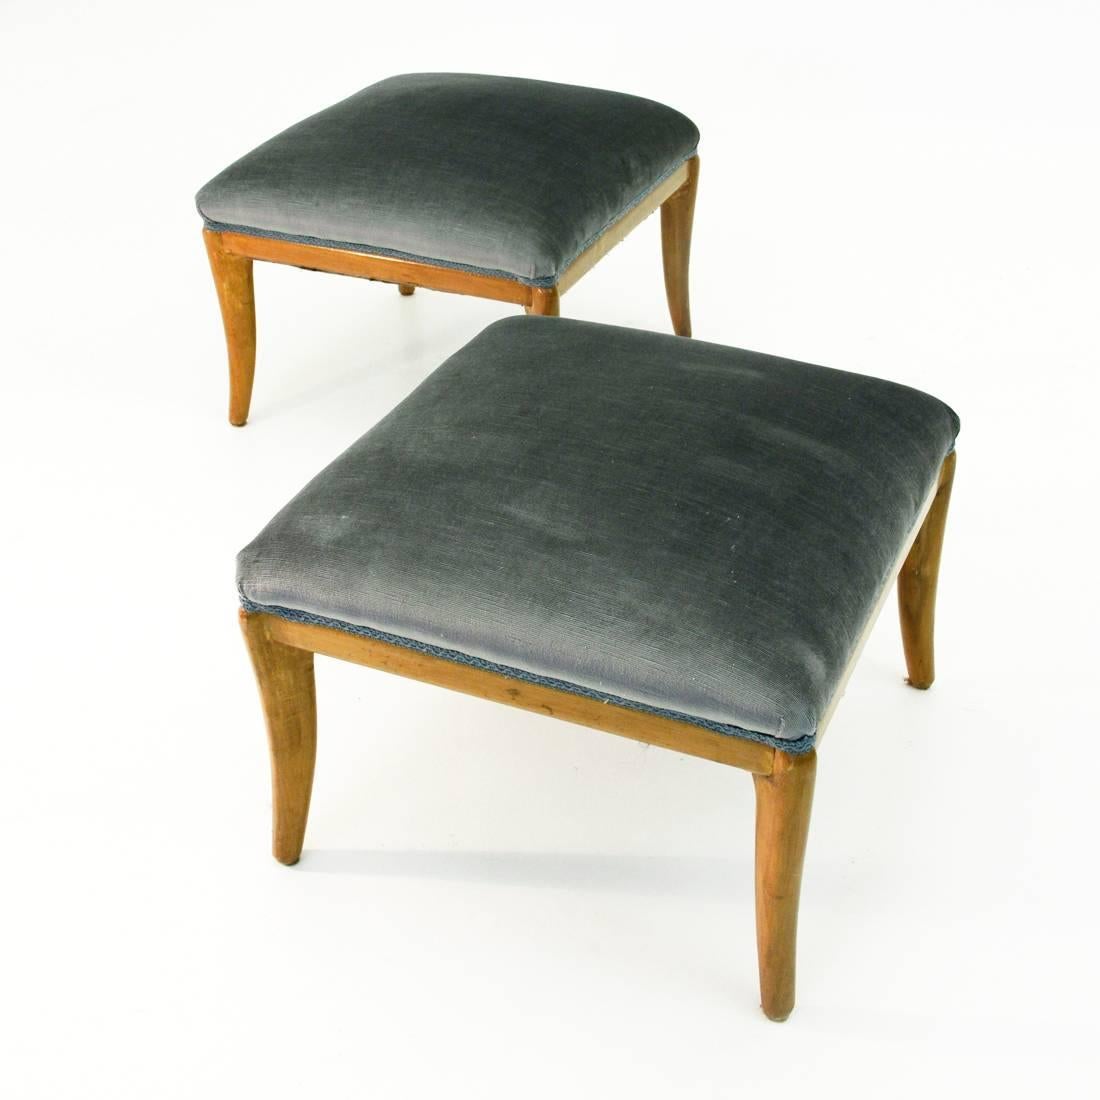 This pair of footstools or poufs was produced in Italy in the 1950s. They are made from square wooden bases with curved wooden legs. The seats have been reupholstered in grey velvet.